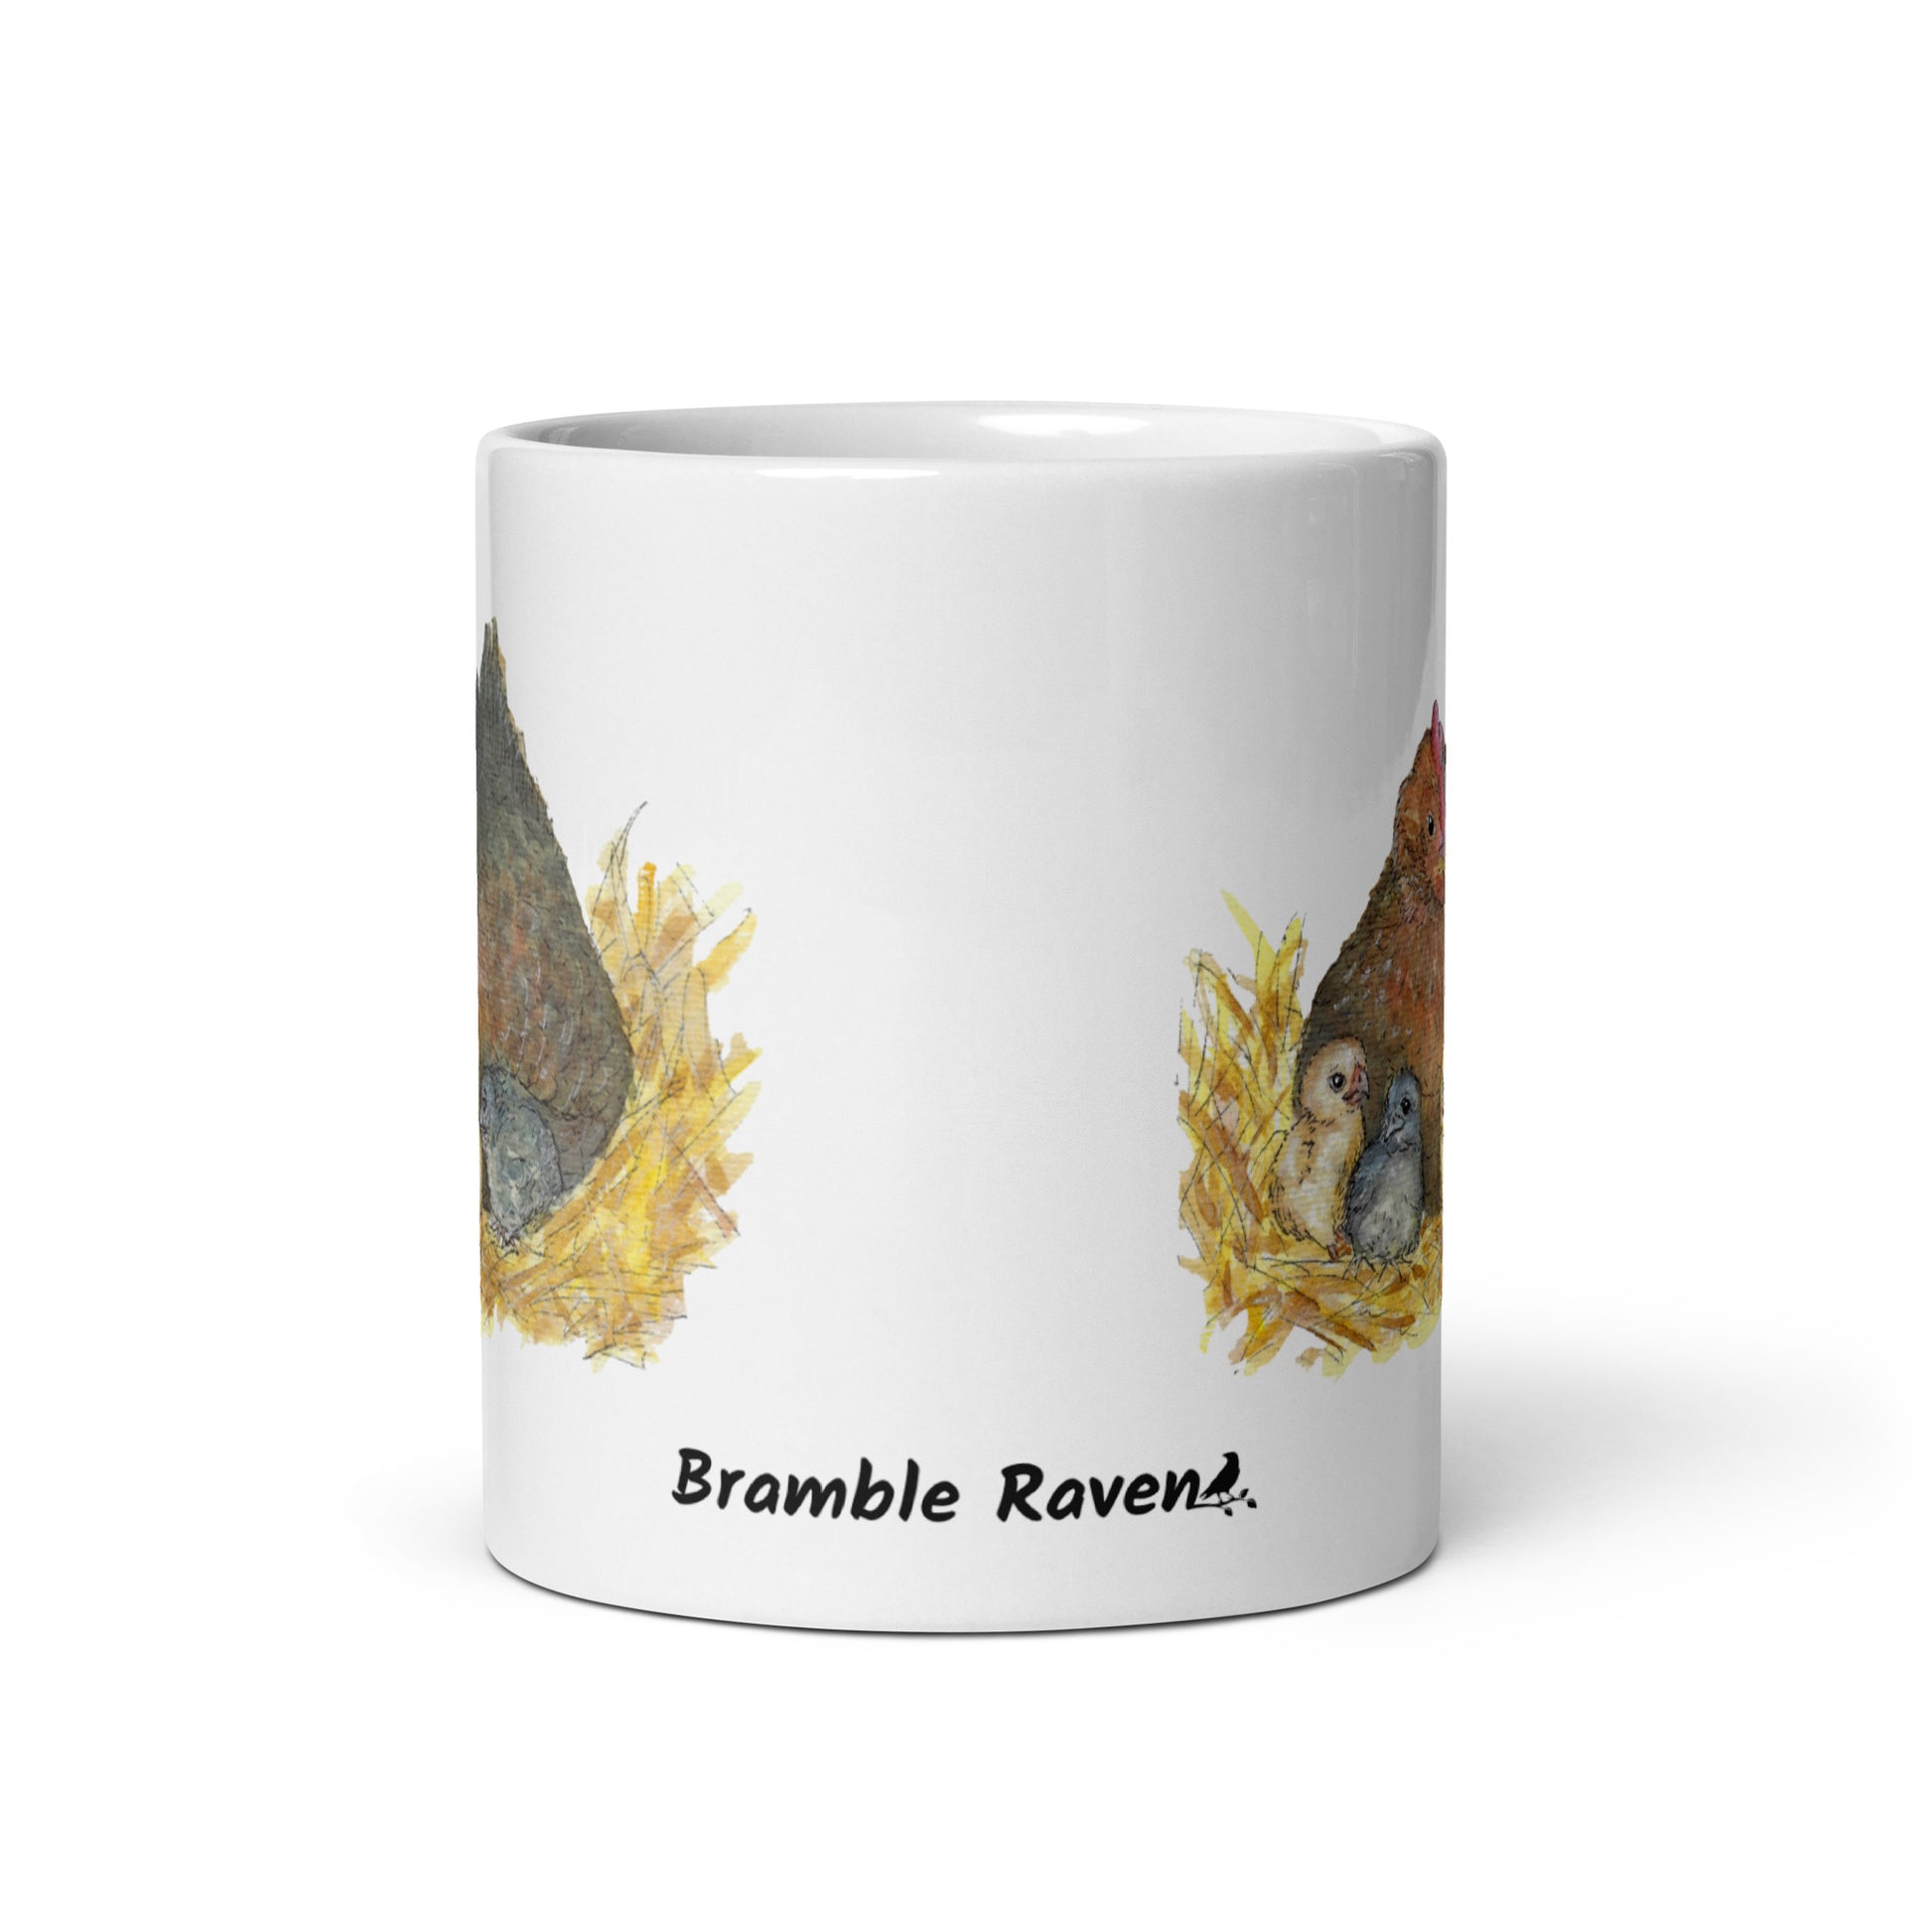 11 ounce white ceramic mug. Features double-sided print of a watercolor mother hen and chicks. Dishwasher and microwave safe. Front view of mug with Bramble Raven logo.